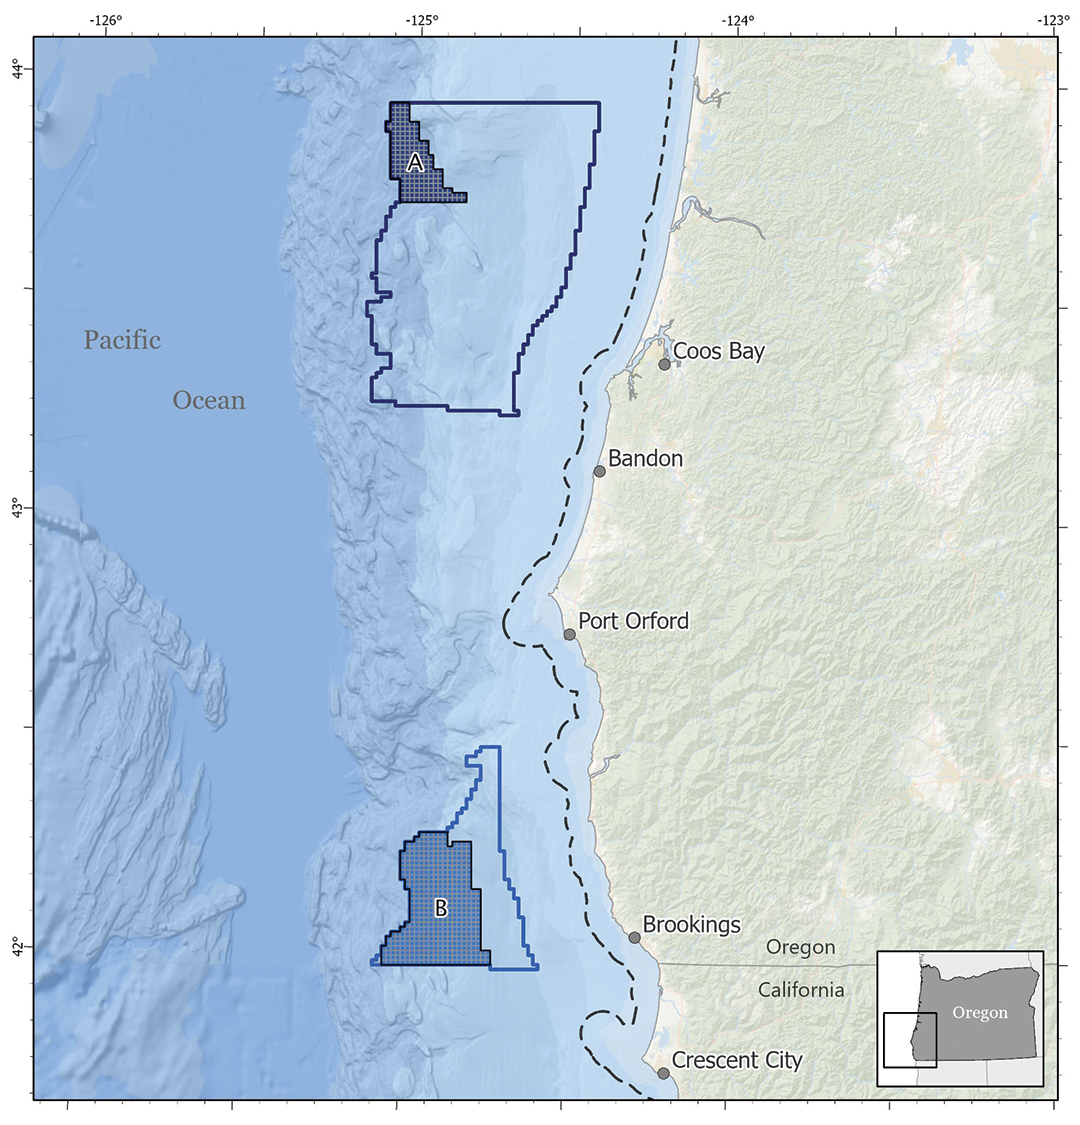 The two Wind Energy Areas encompass a combined 195,012 acres of water off the coast of Oregon.